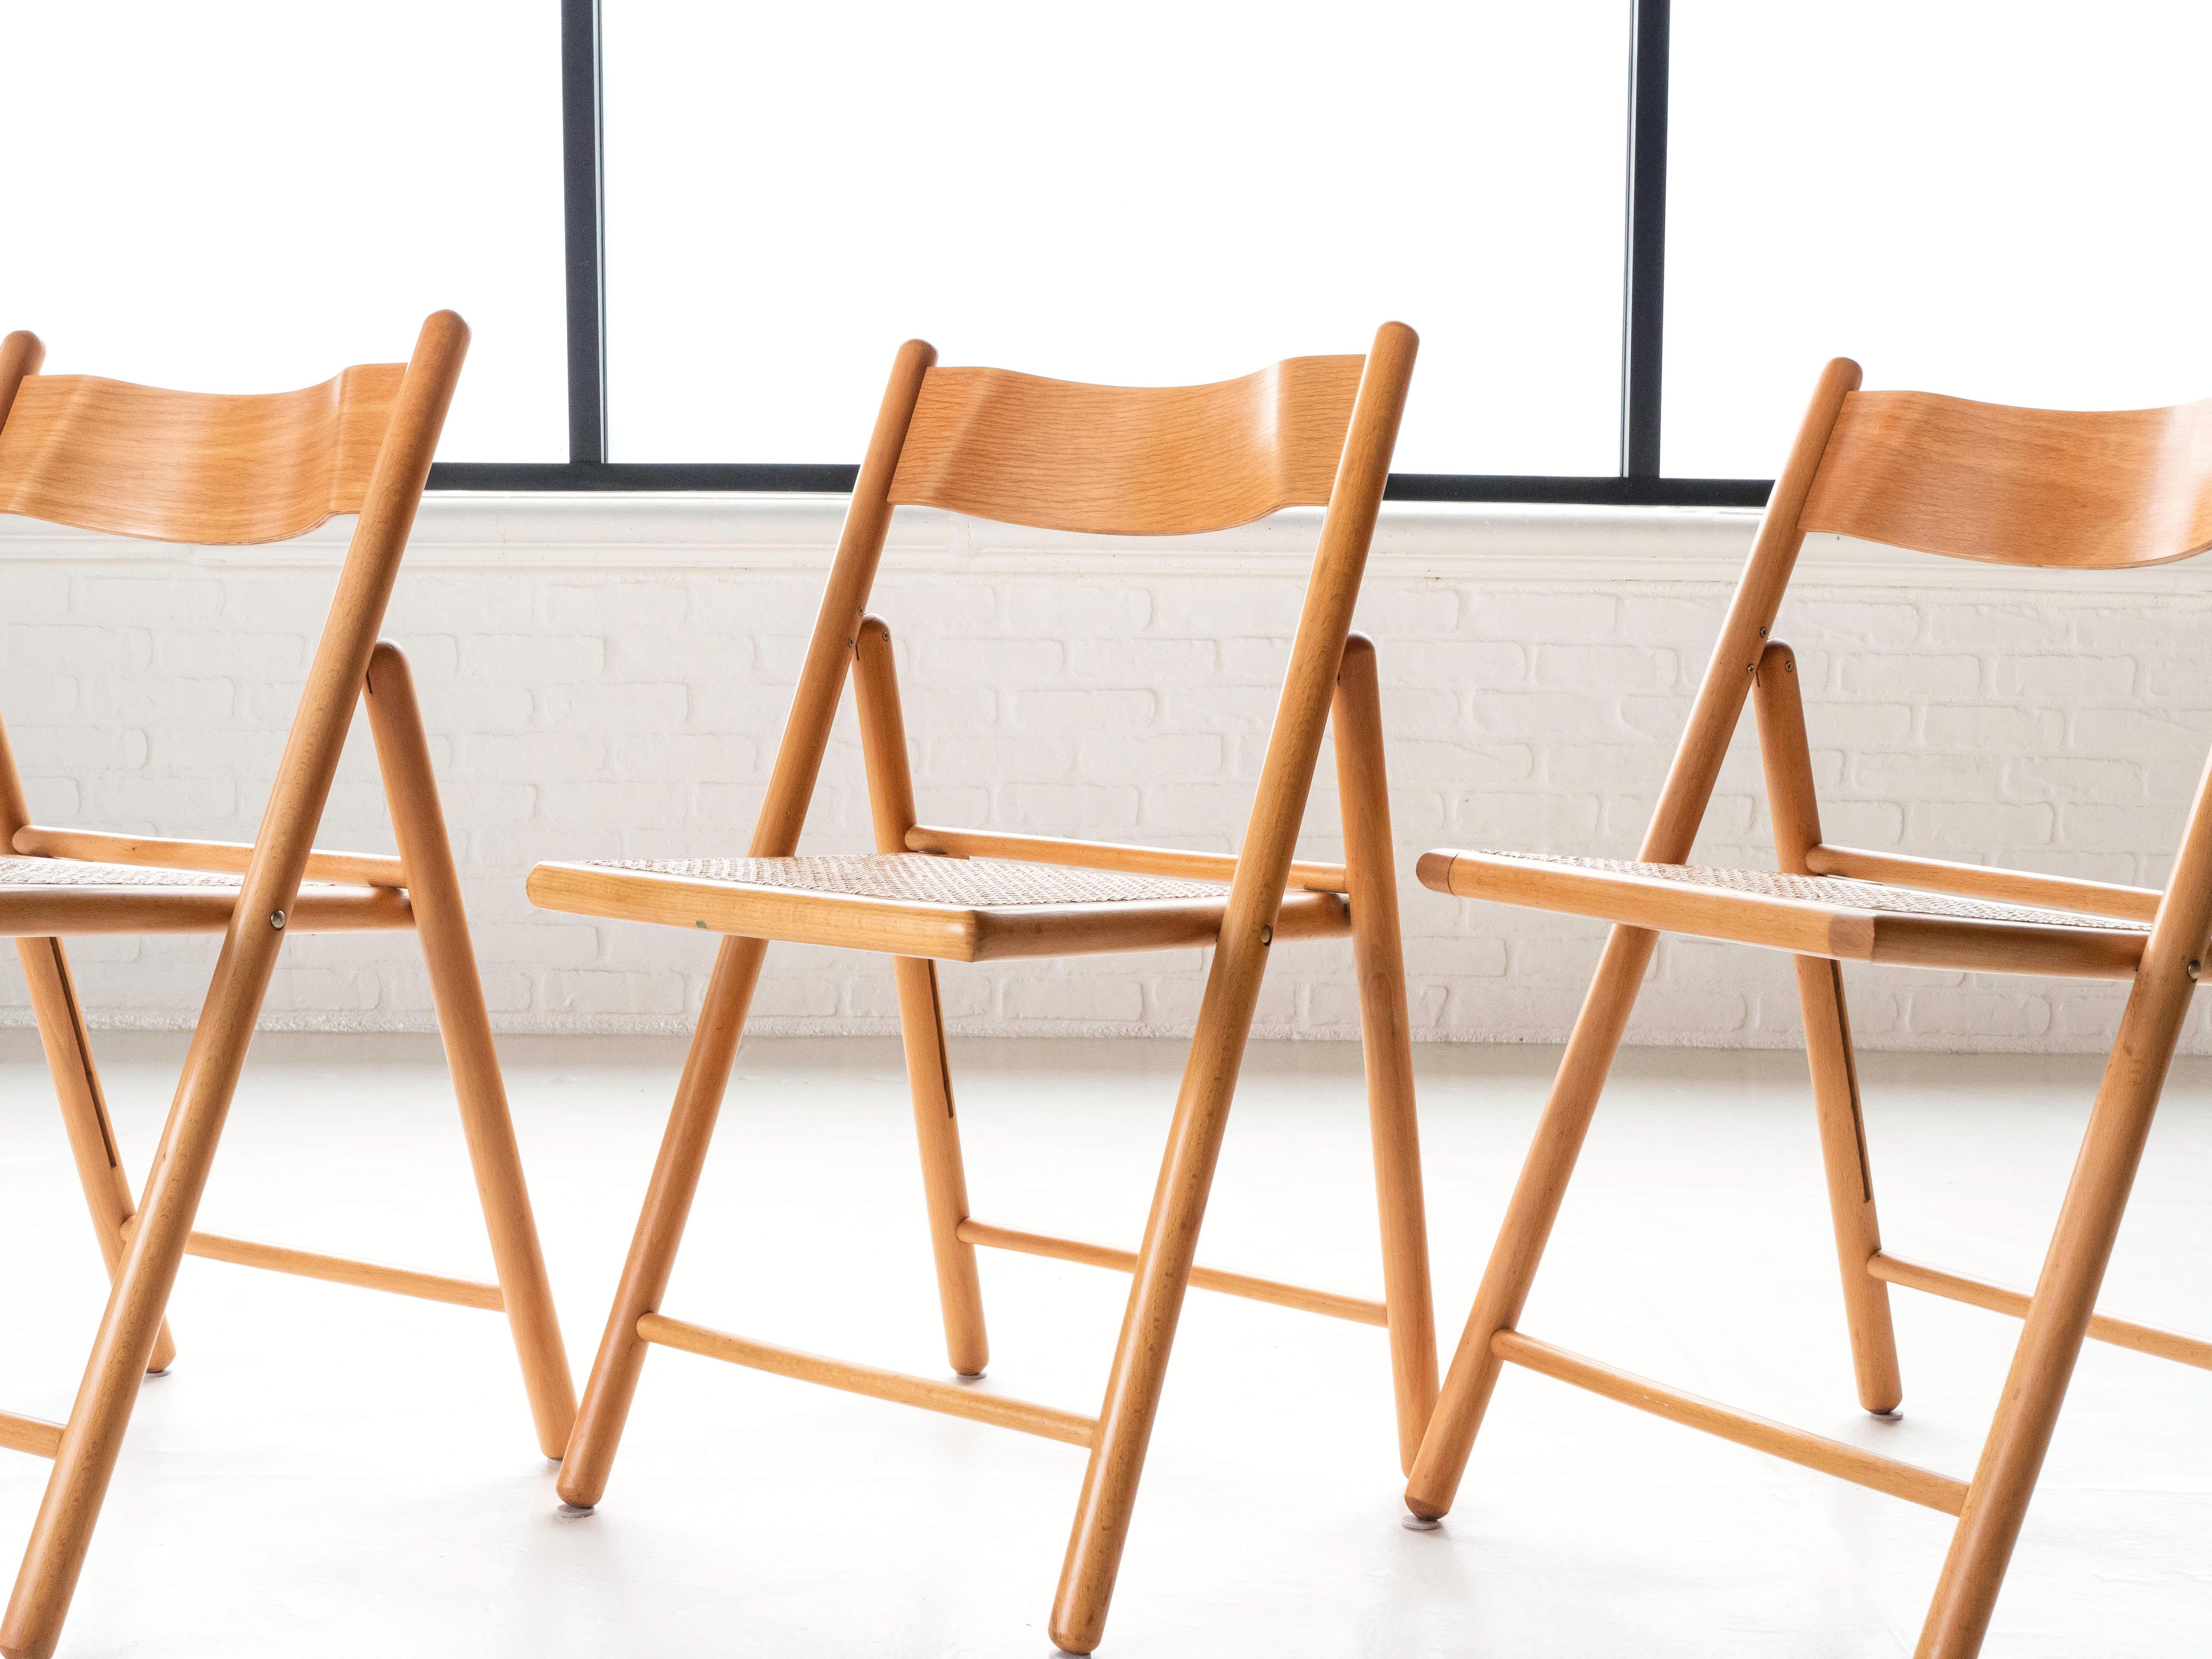 A set of four post modern foldable dining chairs.  Made from solid oak frames and beech backrests.  Cane seats that are in excellent condition.  The chairs have 